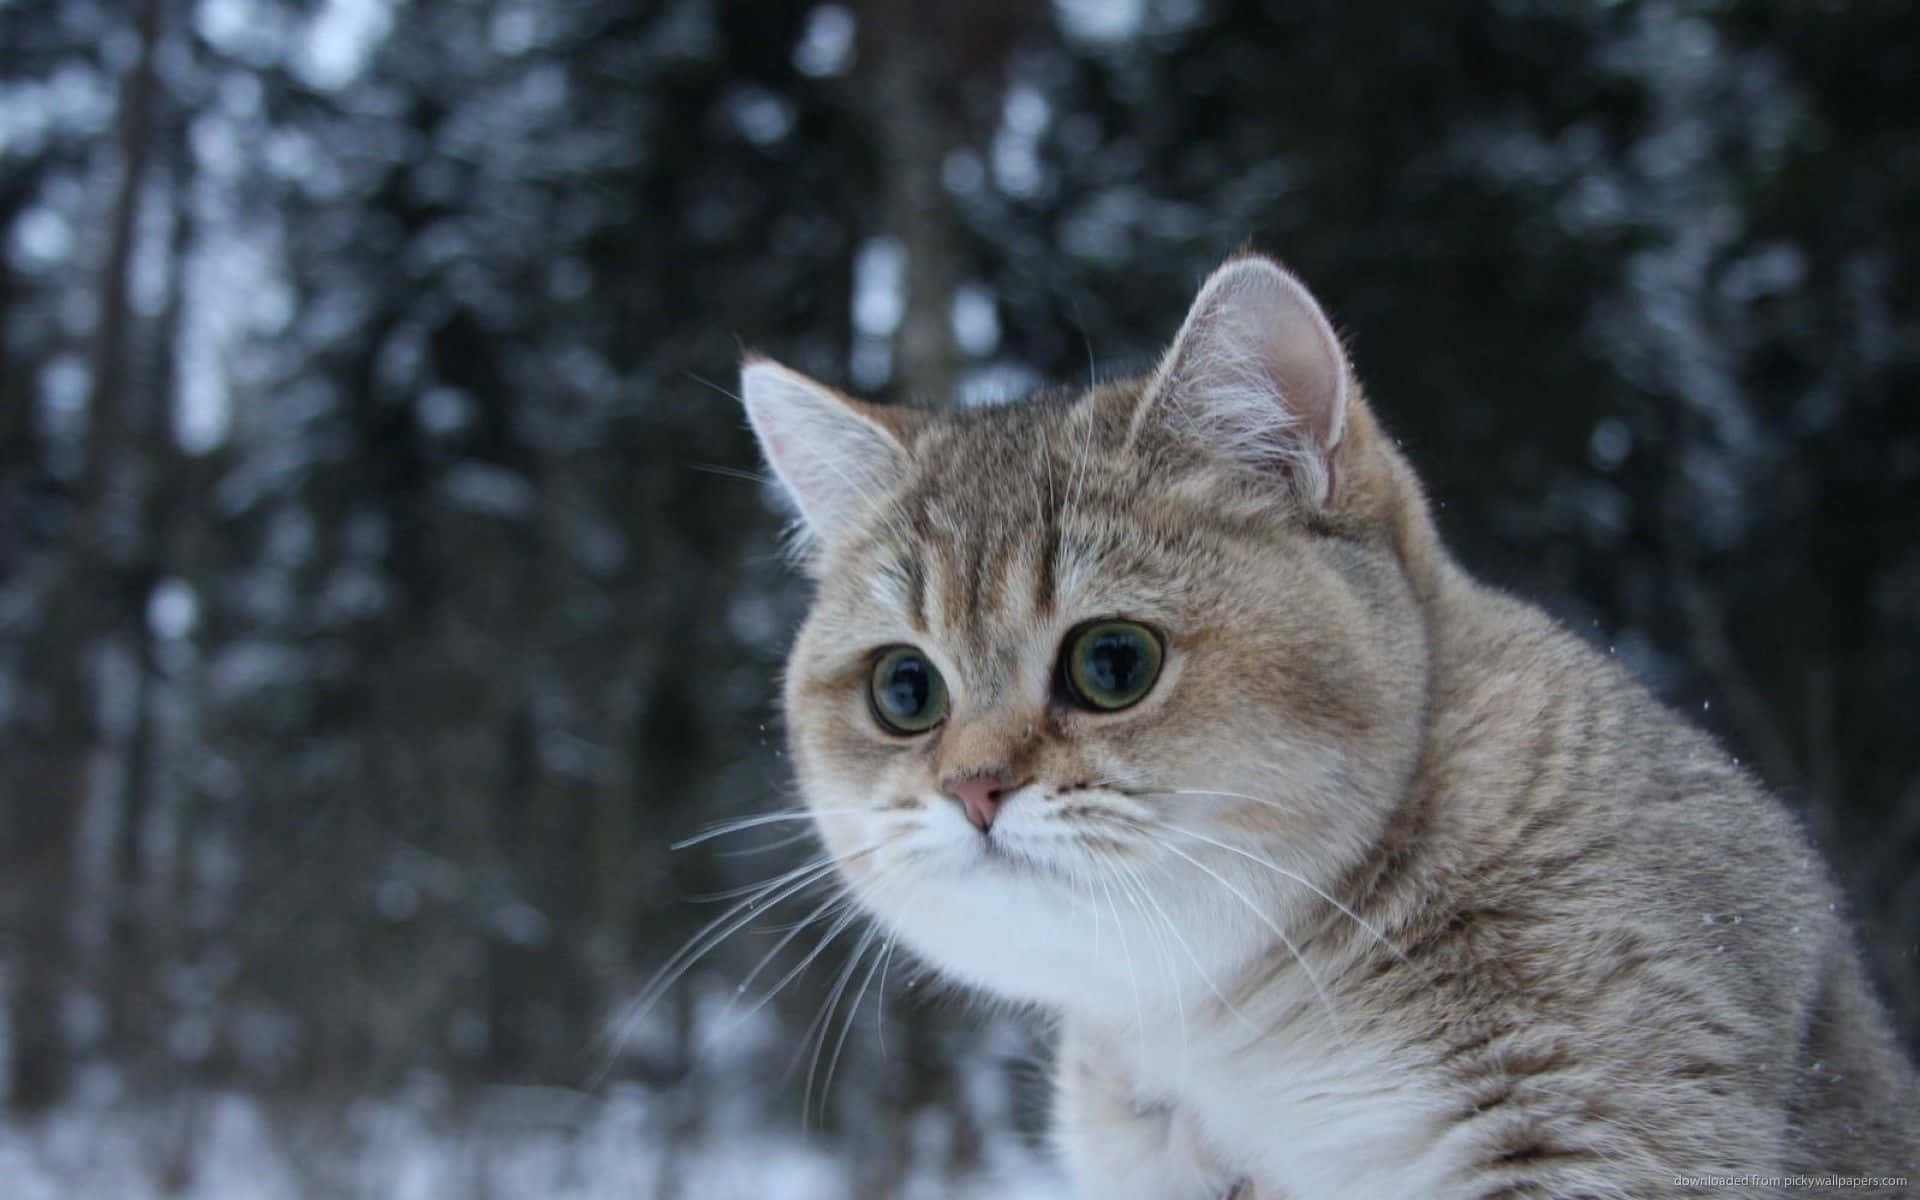 A Cat Is Standing In The Snow Looking At The Camera